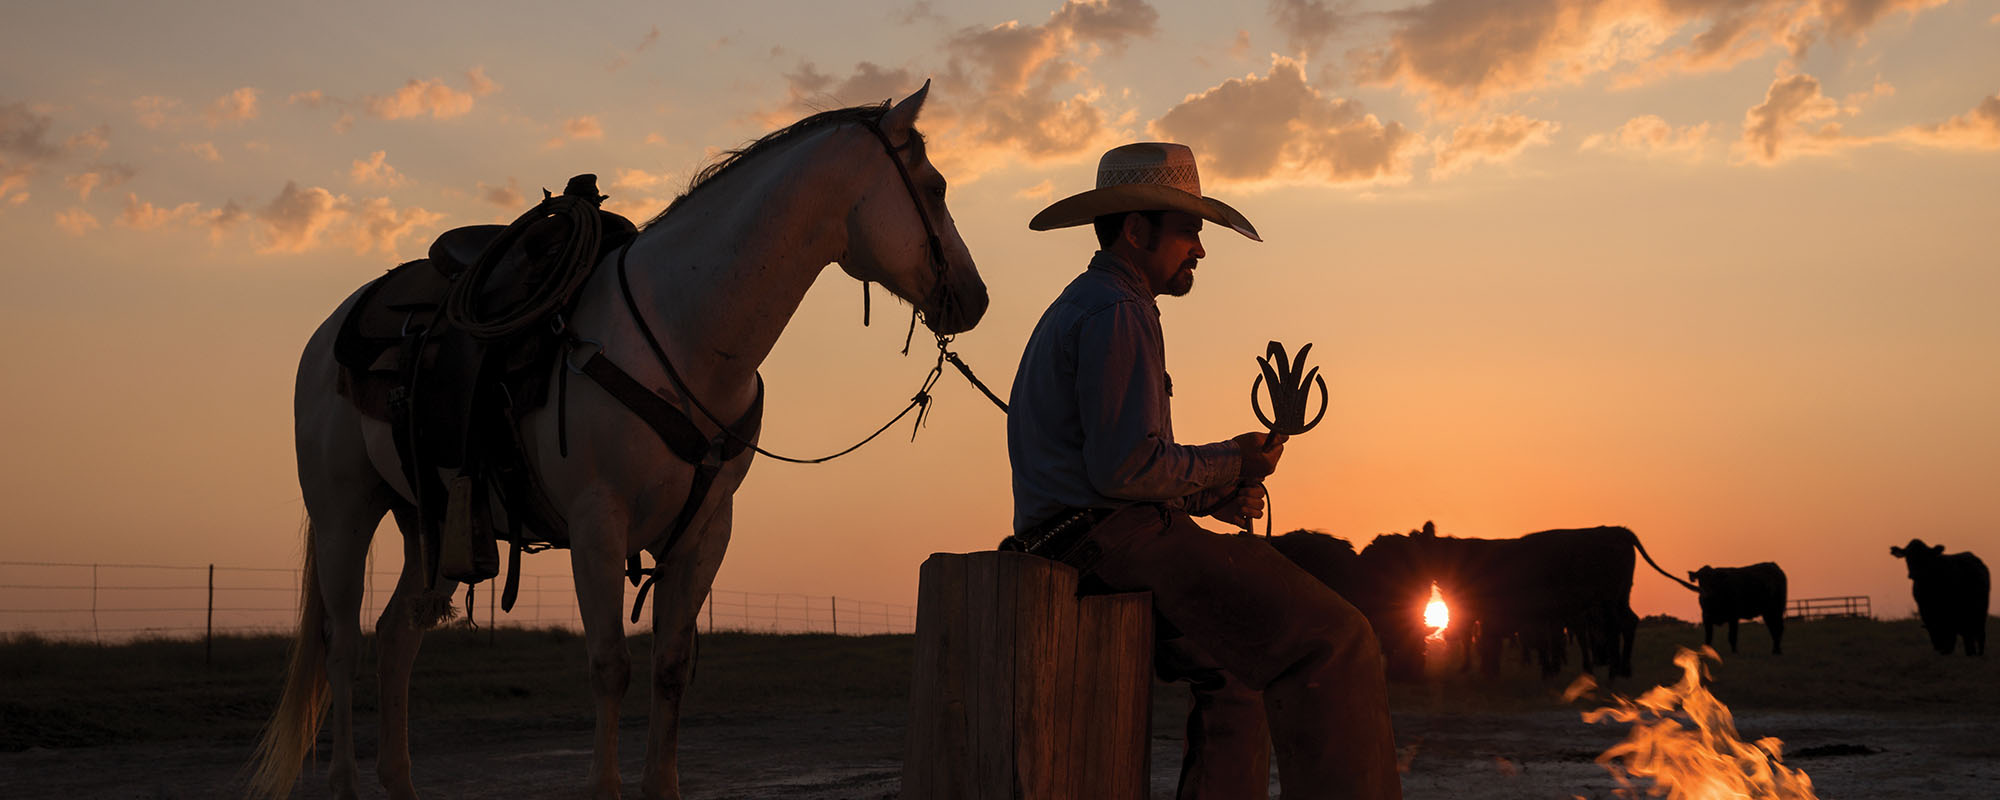 Cowboy with horse and cattle in sunset